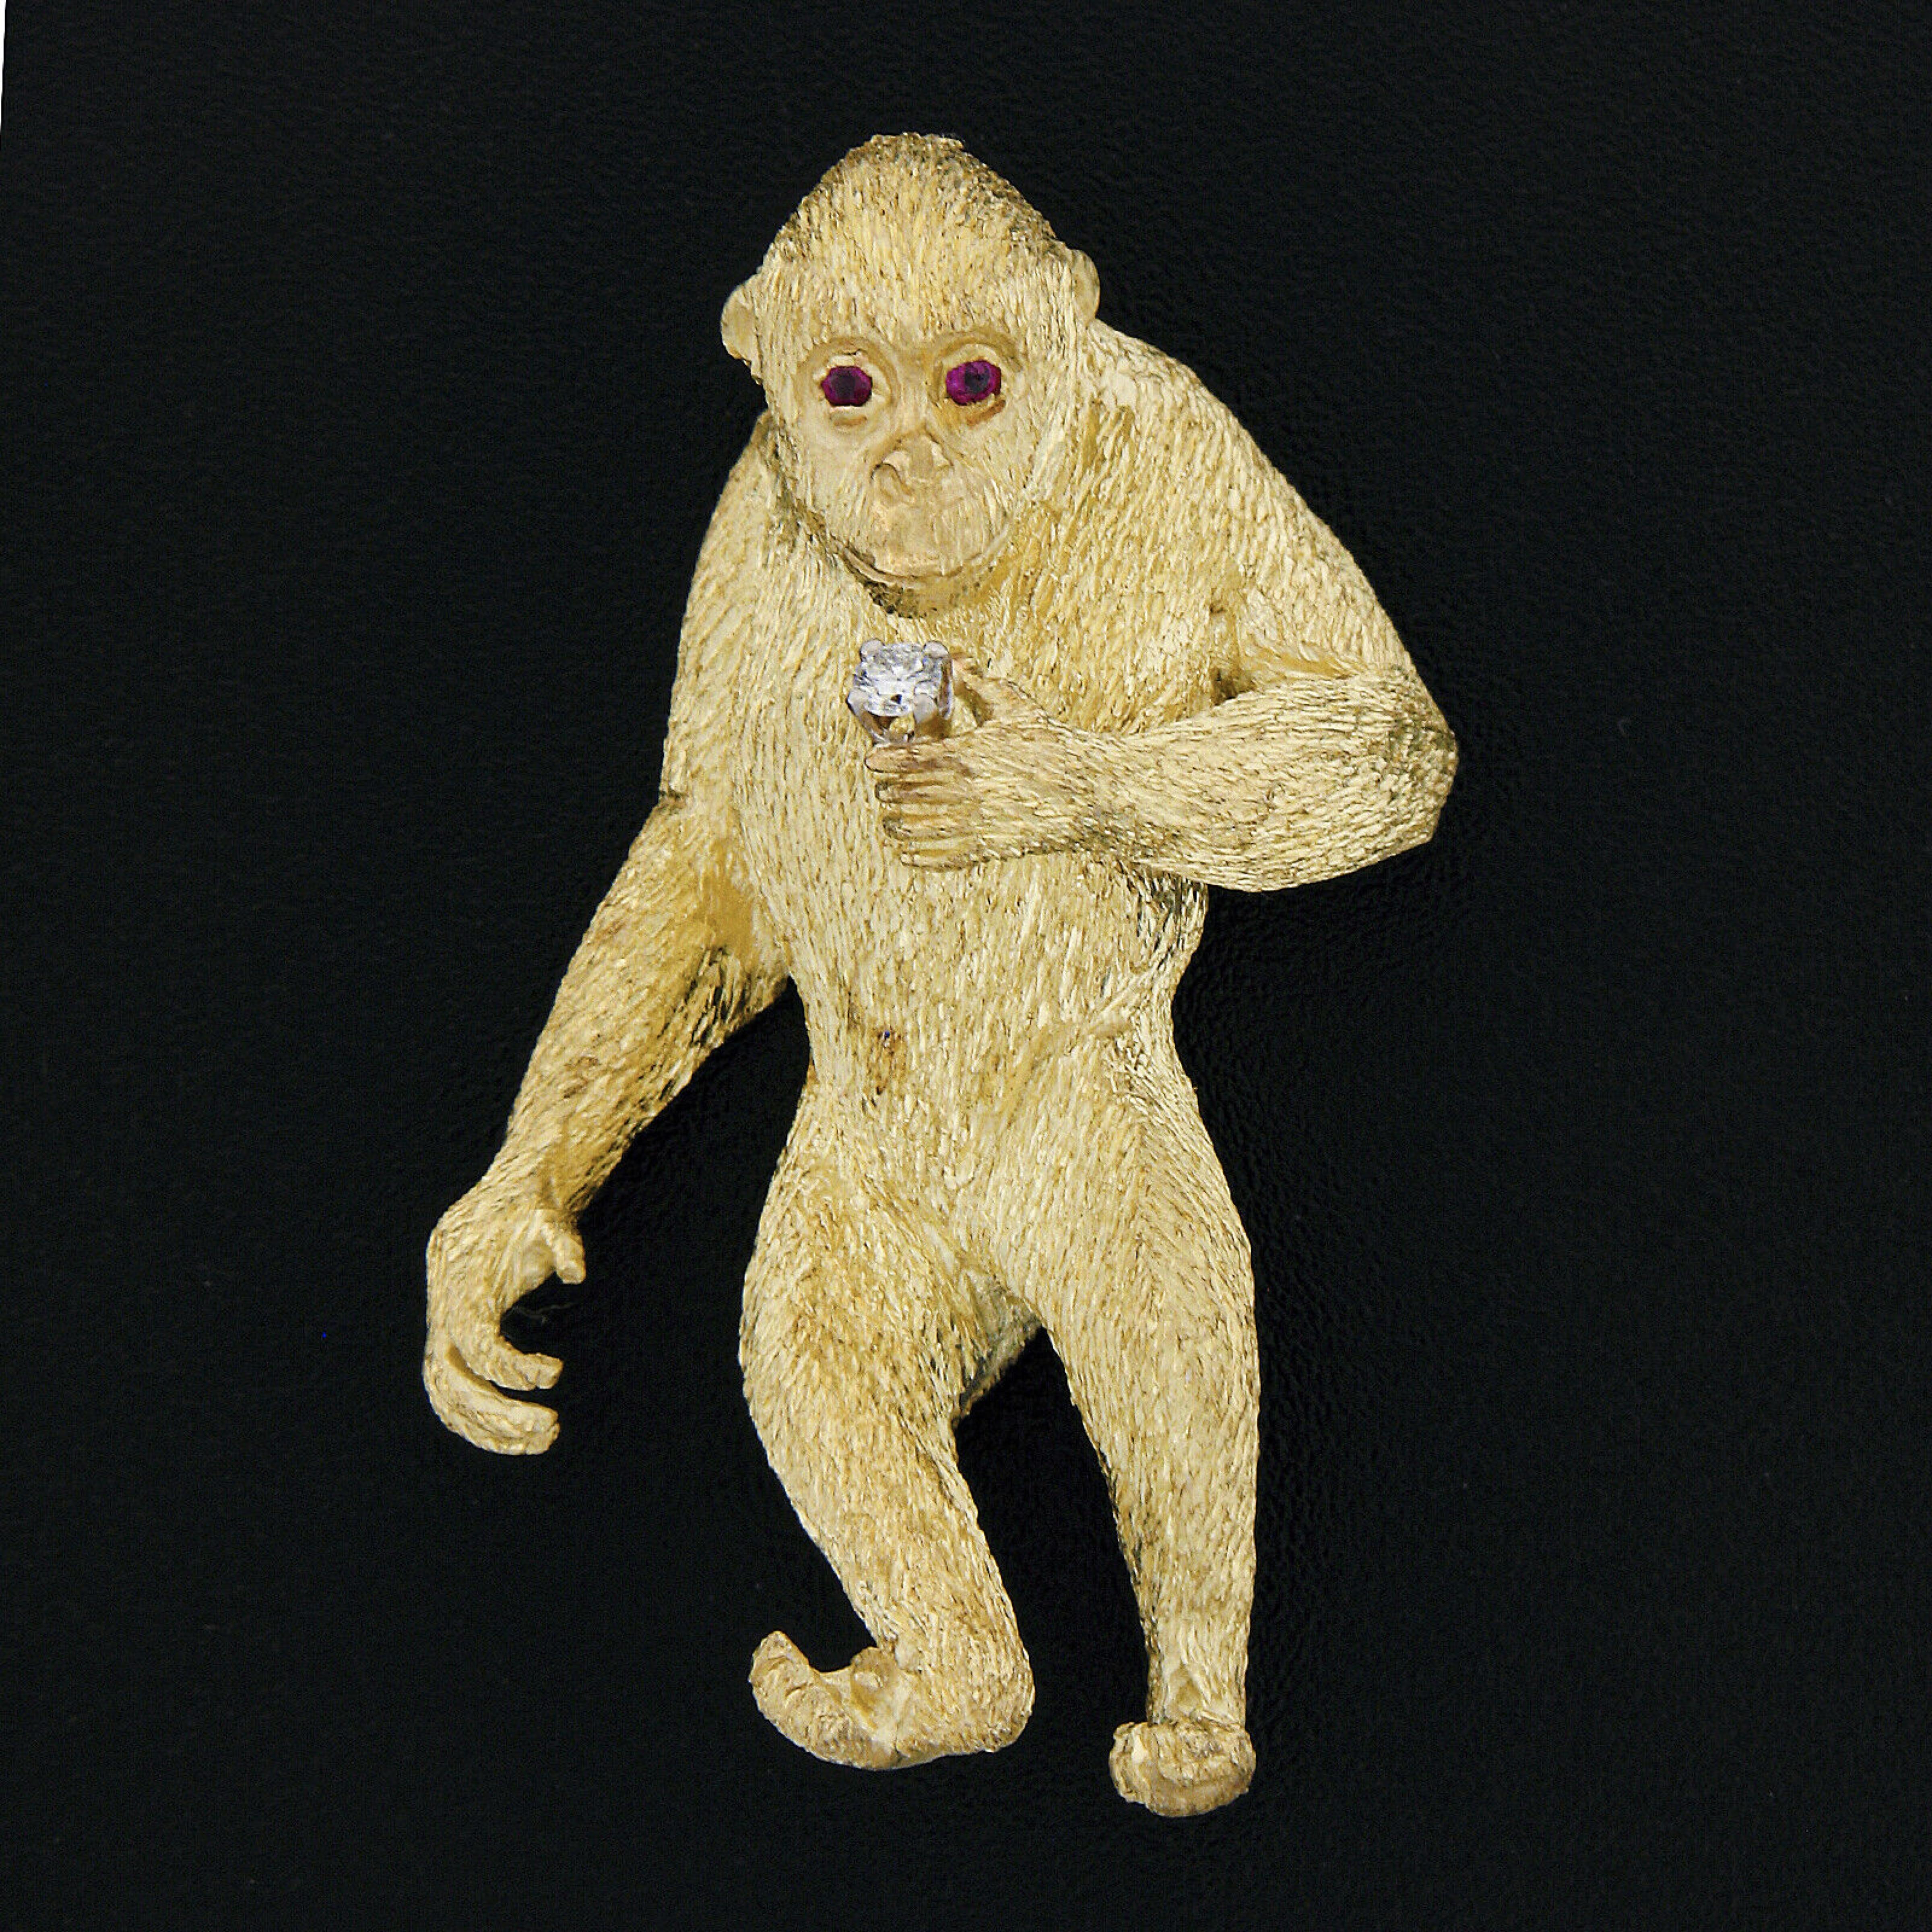 This incredible vintage brooch/pin is designed by Craig Drake and very well crafted in solid 18k yellow gold. It features a perfectly structured monkey design with unique, and remarkably outstanding workmanship and texture that bring out maximum